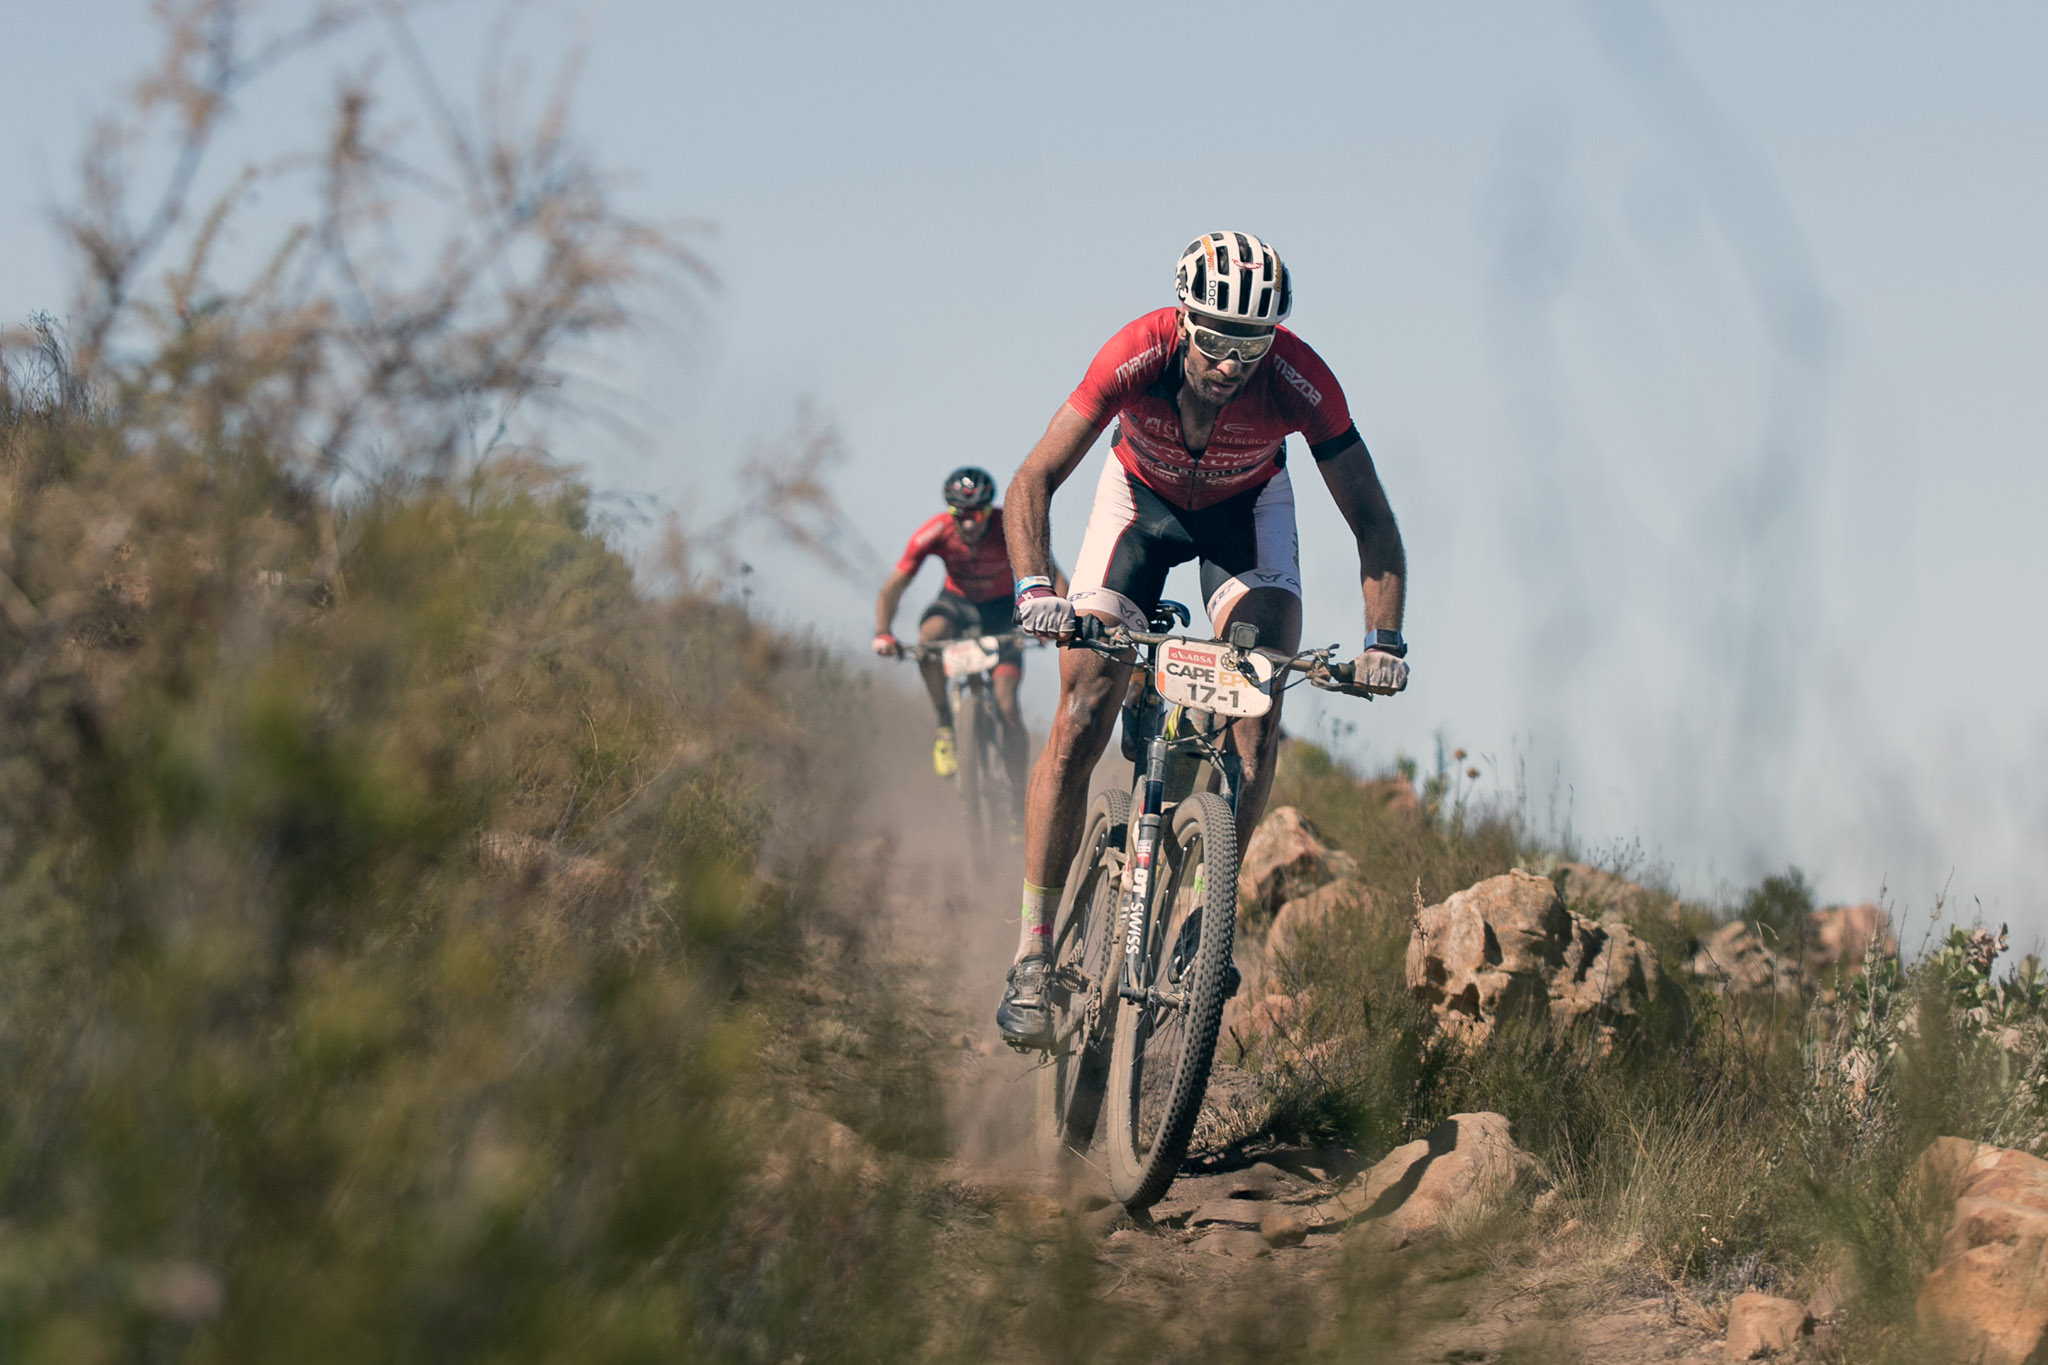 Nicola Rohrbach and Matthias Pfrommer on their way to a stage victory during stage 2 of the 2016 Absa Cape Epic Mountain Bike stage race from Saronsberg Wine Estate in Tulbagh, South Africa on the 15th March 2016 Photo by Mark Sampson/Cape Epic/SPORTZPICS PLEASE ENSURE THE APPROPRIATE CREDIT IS GIVEN TO THE PHOTOGRAPHER AND SPORTZPICS ALONG WITH THE ABSA CAPE EPIC ace2016